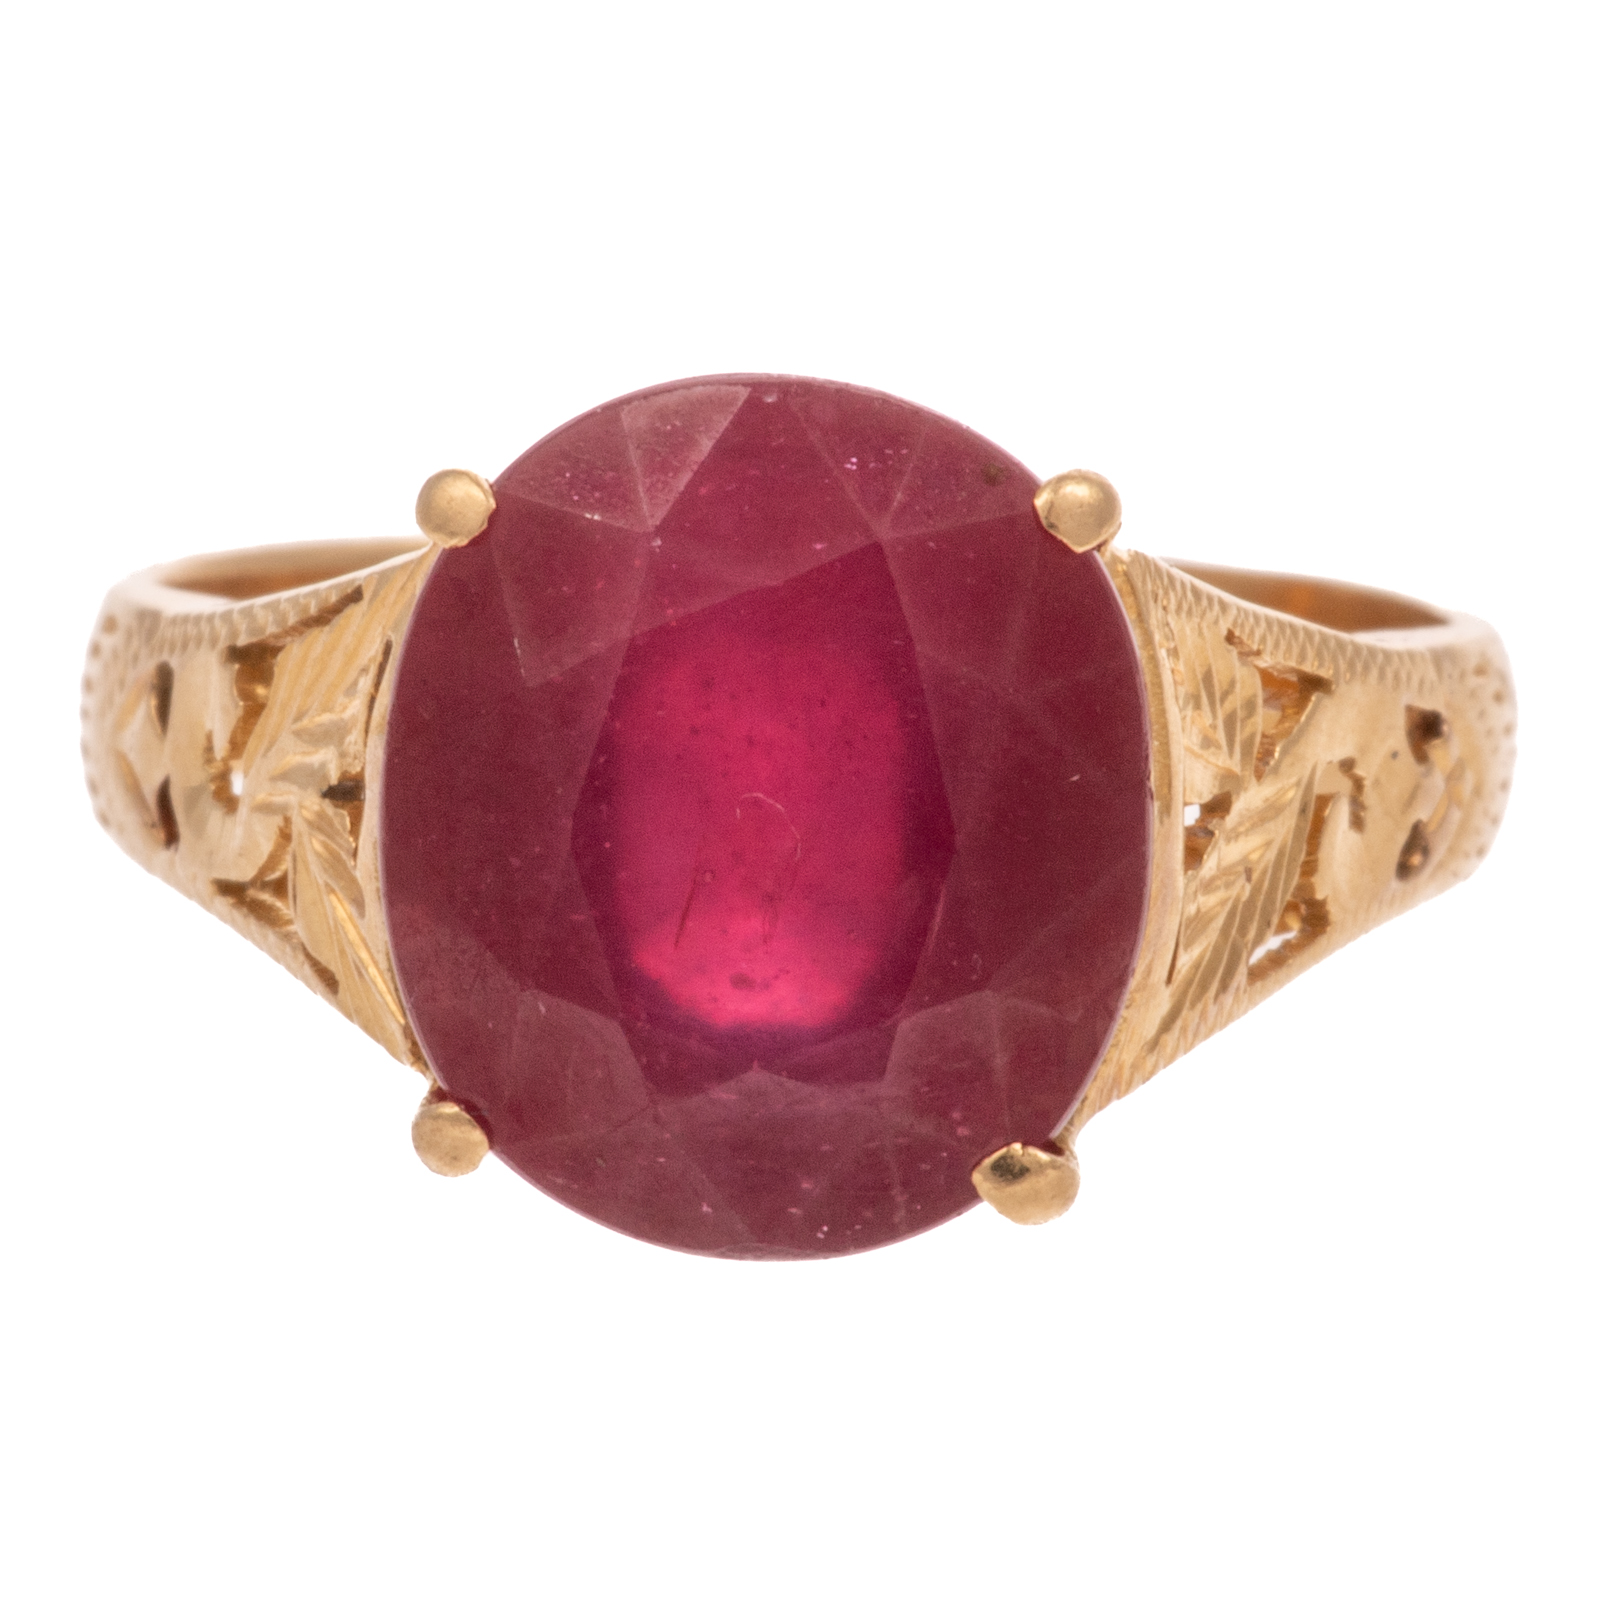 A CLASSIC RUBY RING IN 18K YELLOW 2ead8f